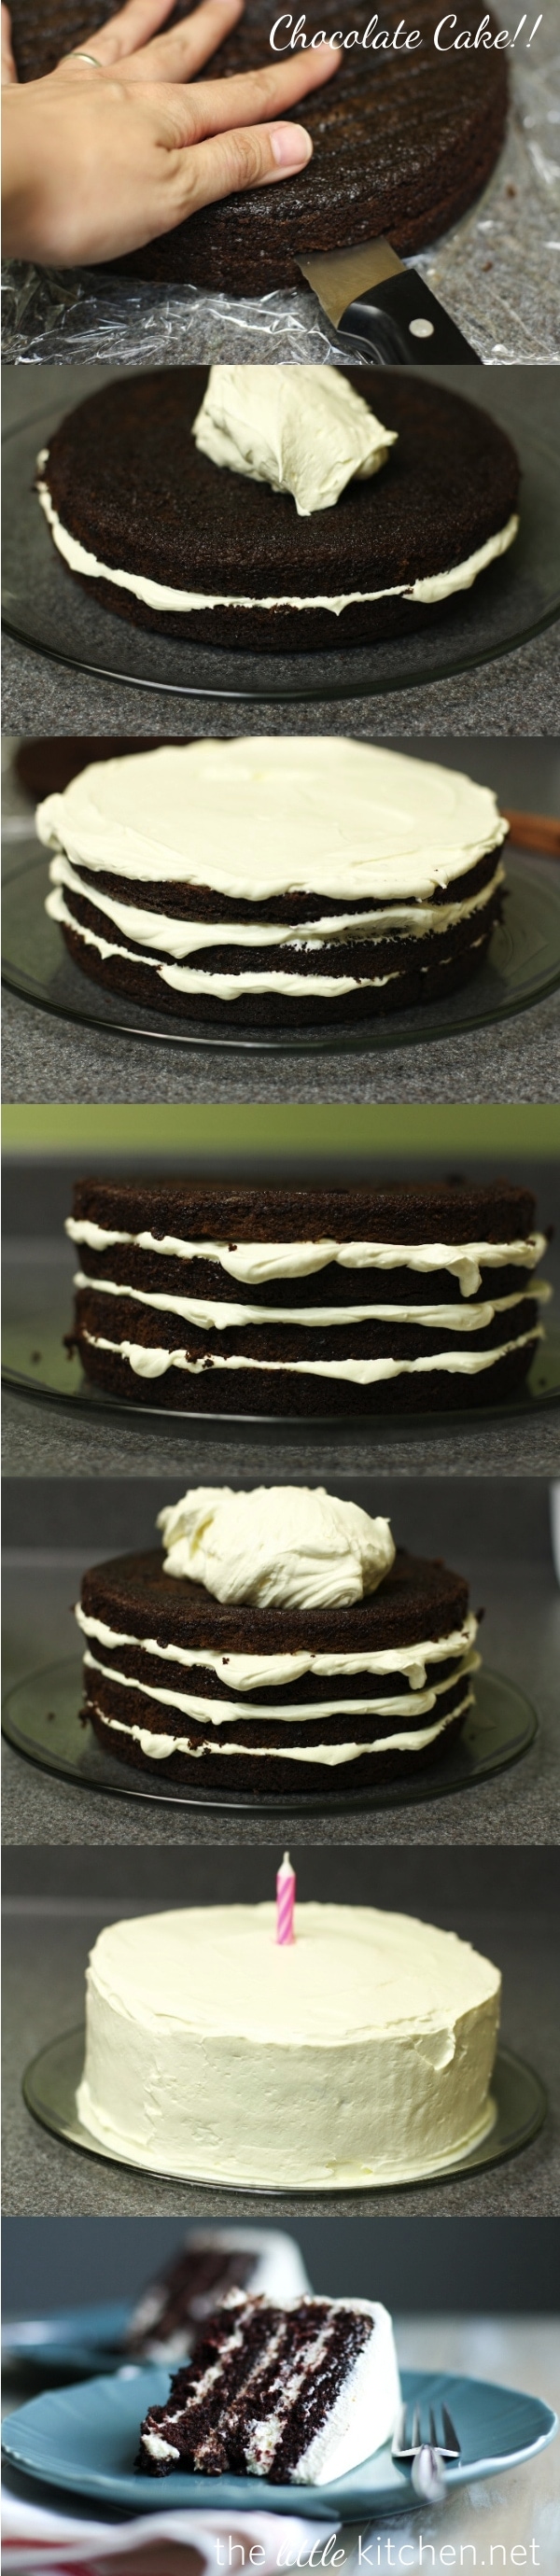 {The Best} Chocolate Cake with Pudding Frosting from thelittlekitchen.net